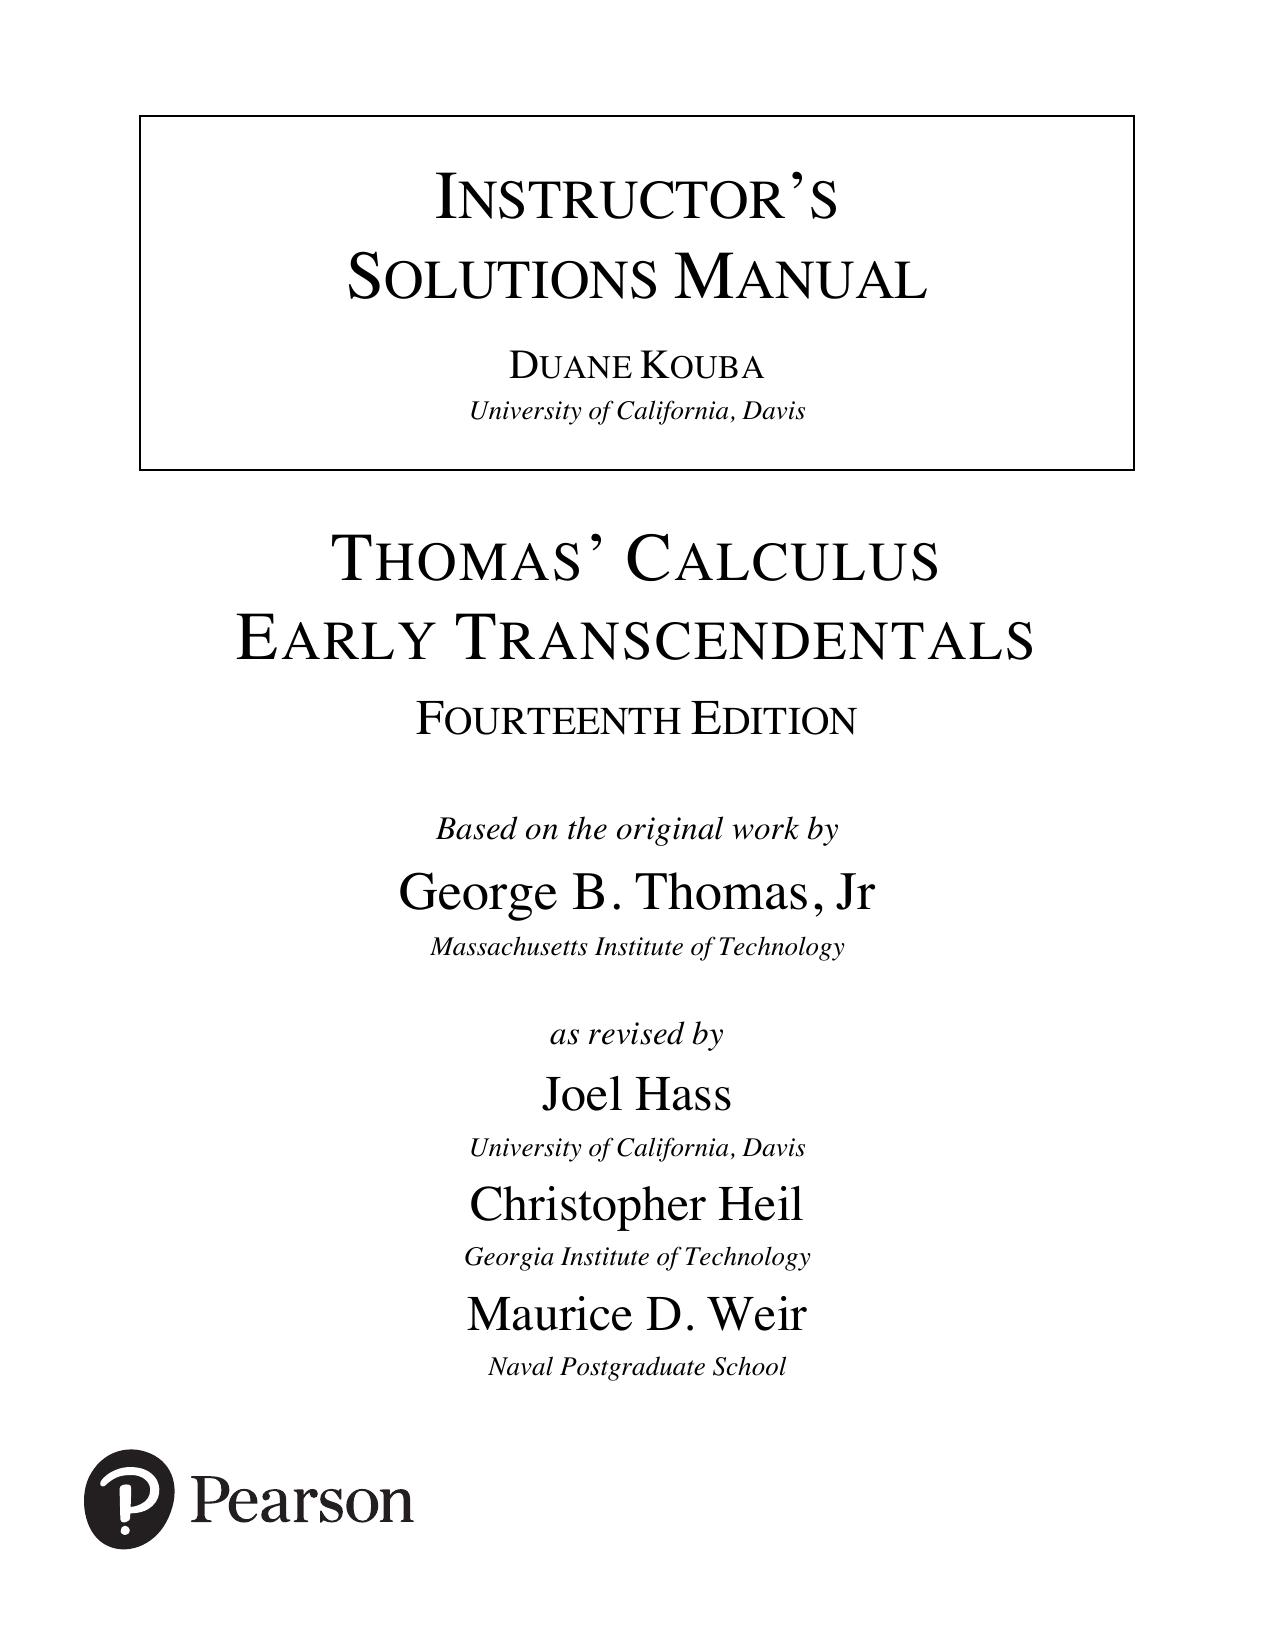 Instructor's Solutions Manual Thomas' Calculus Early Transcendentals Fourteenth Edition by Duane Kouba